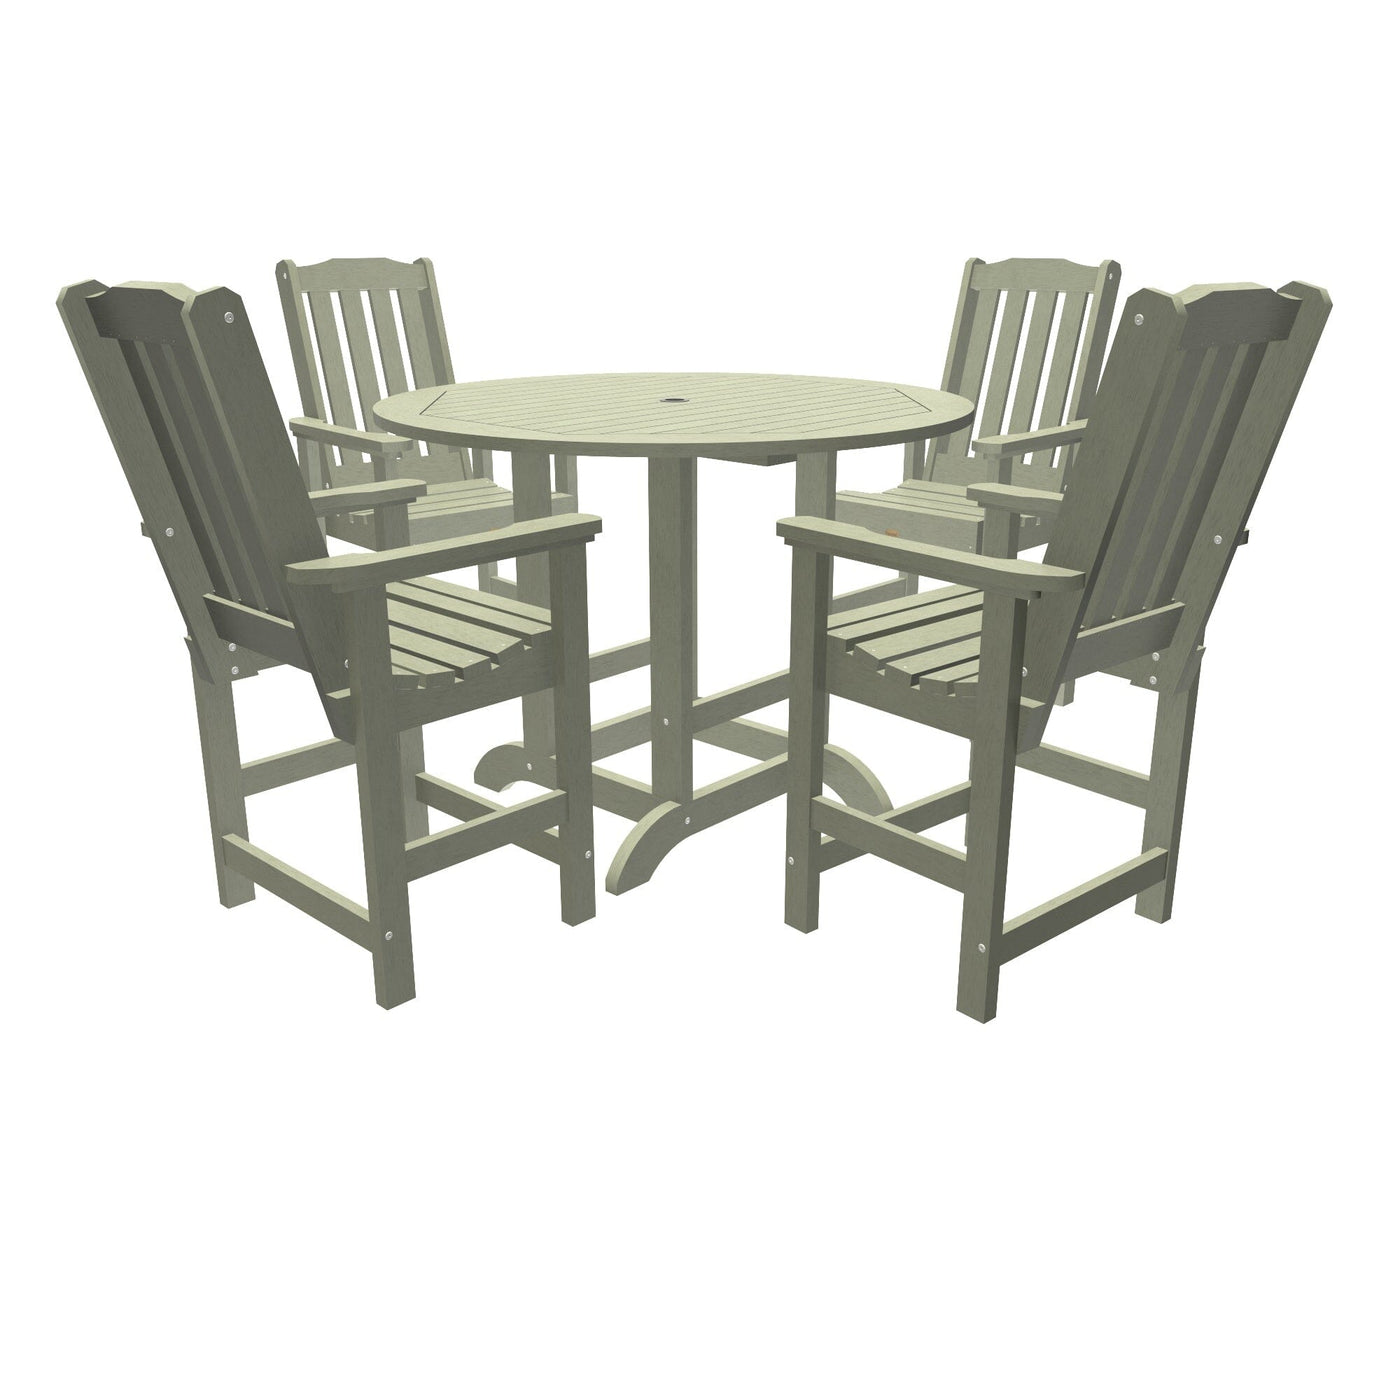 Lehigh 5pc 48in Round Dining Set - Counter Height Dining Highwood USA Eucalyptus 